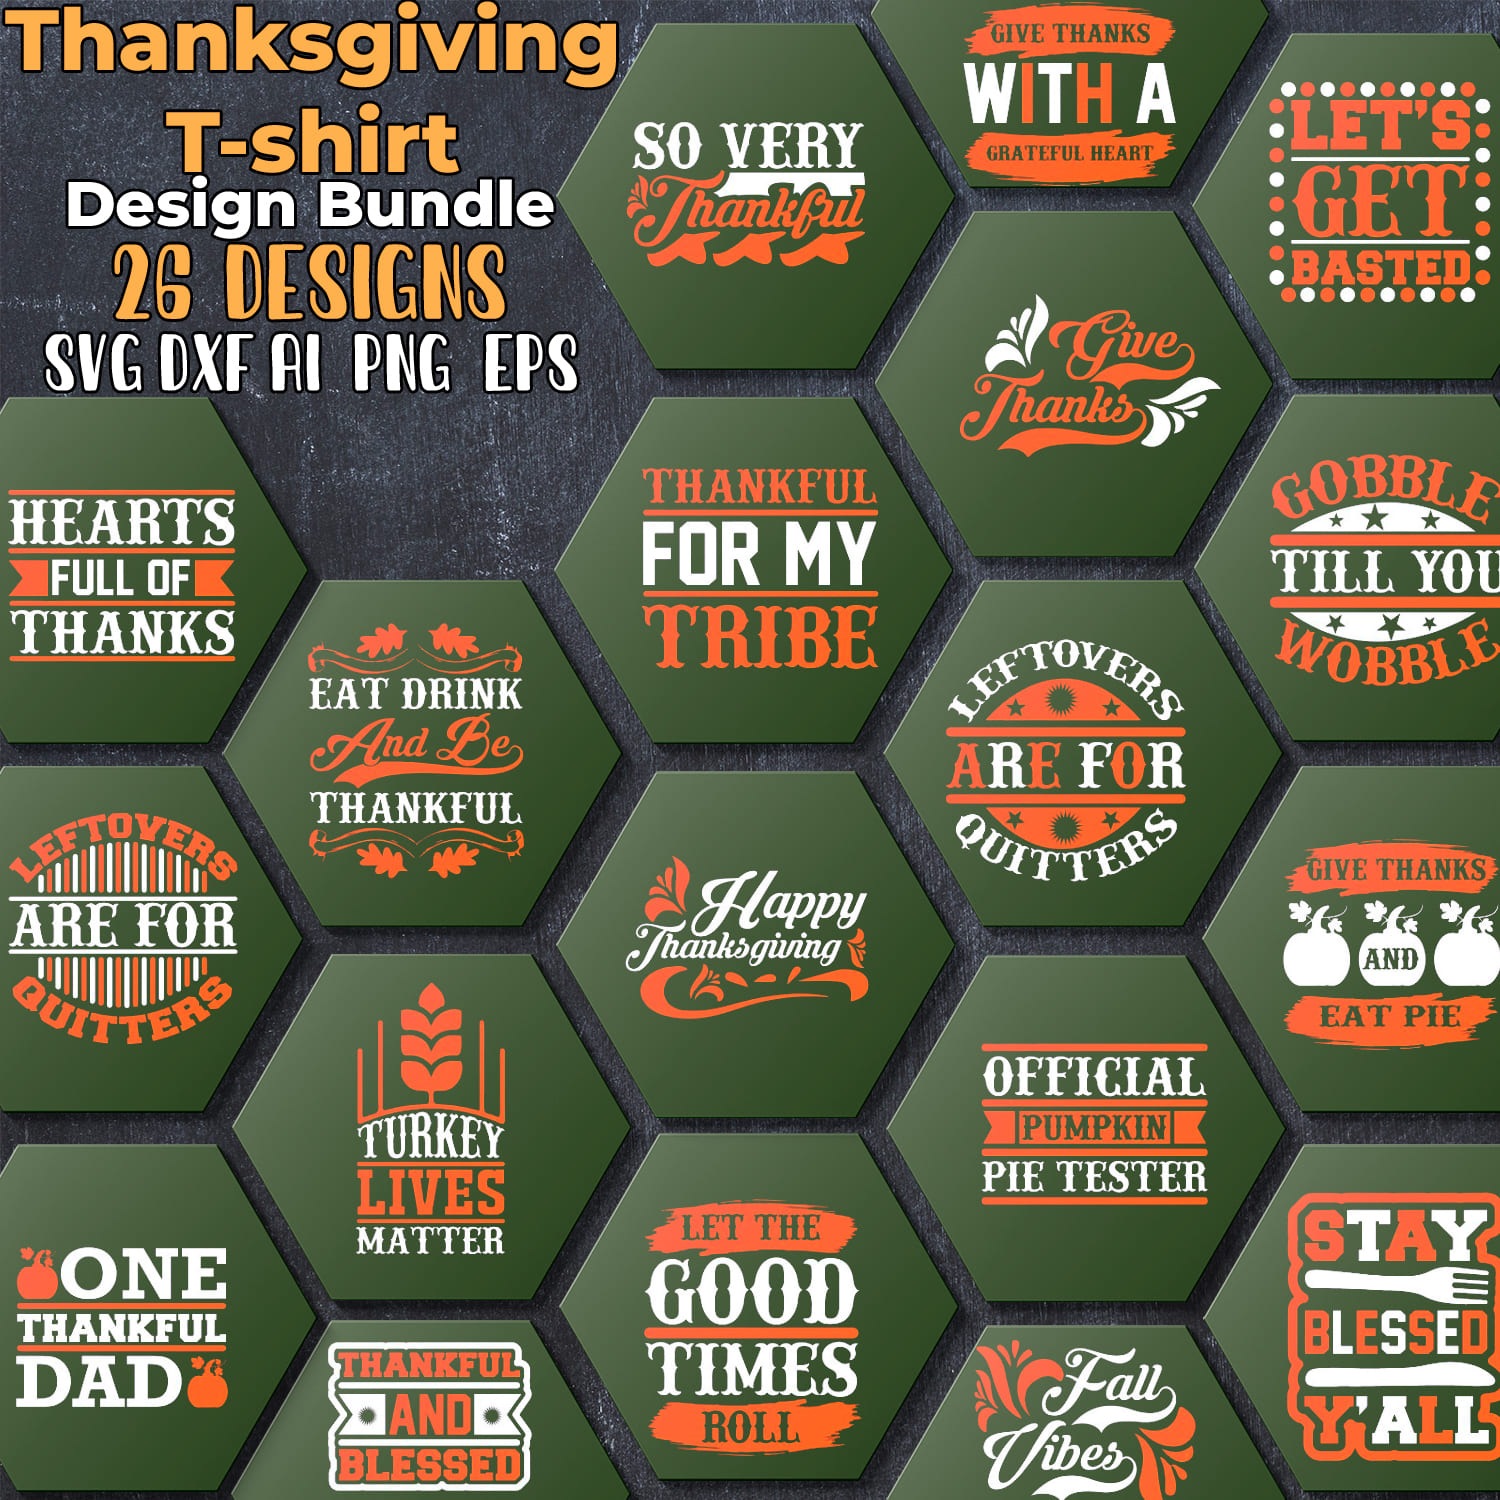 Collection of bright images on the theme of Thanksgiving.